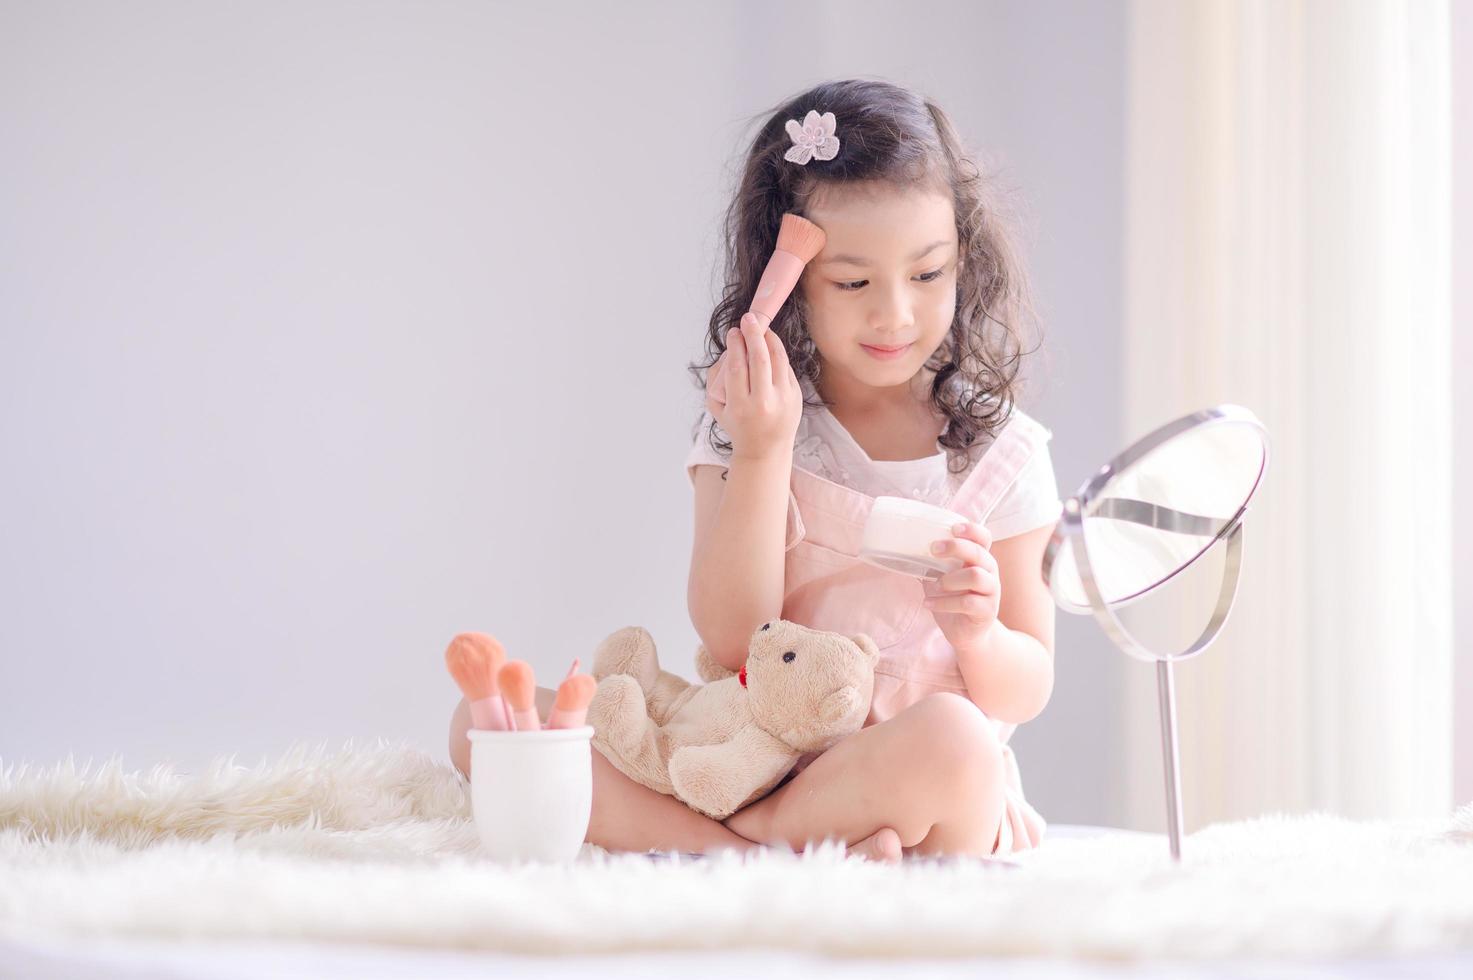 A cute little Asian girl is happily applying makeup brushes with powder in her bedroom photo